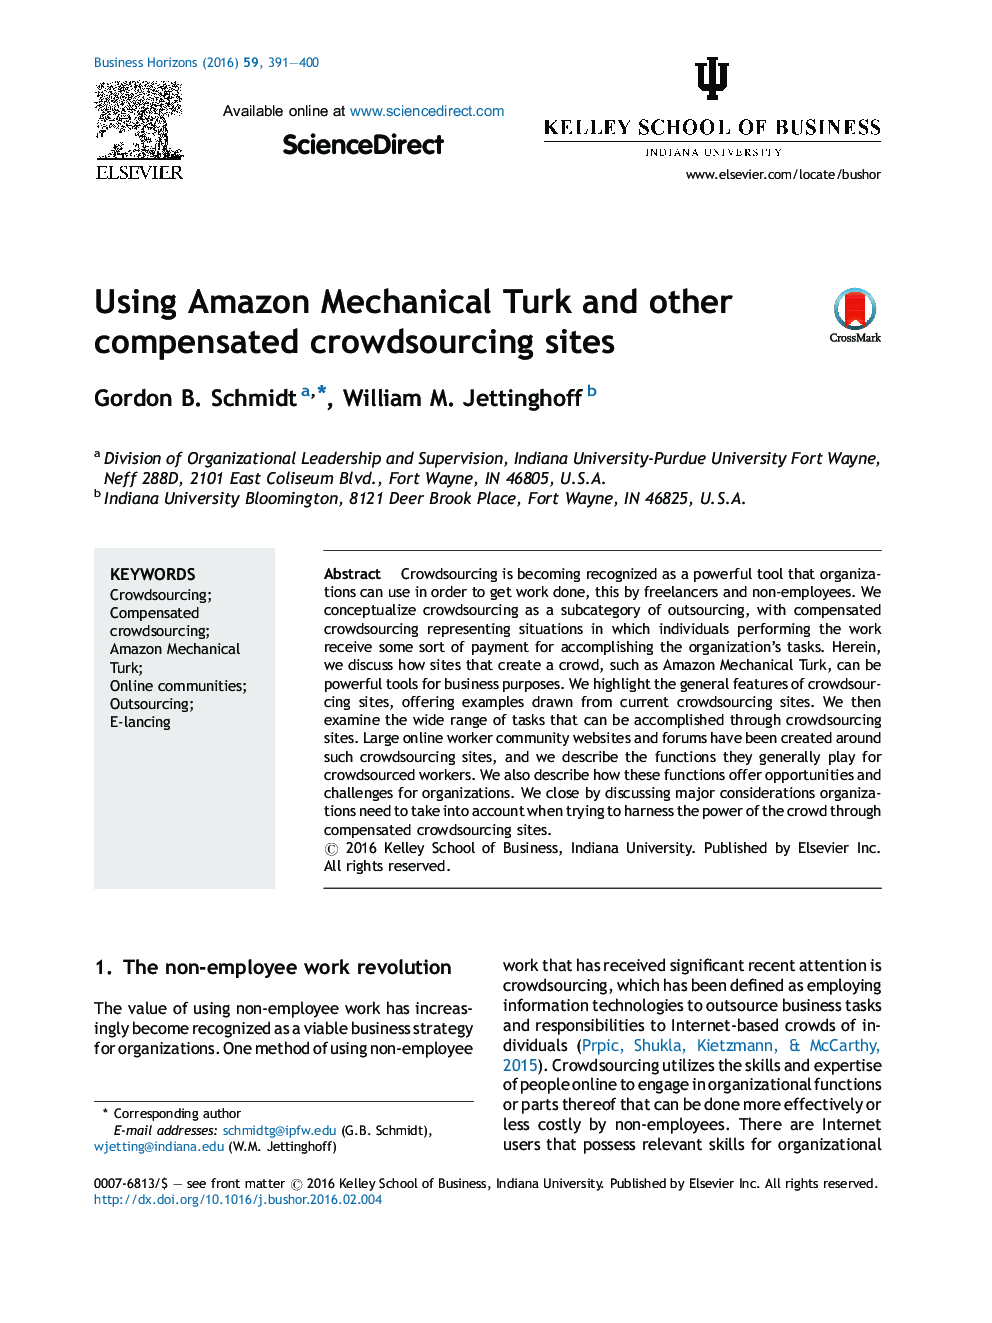 Using Amazon Mechanical Turk and other compensated crowdsourcing sites